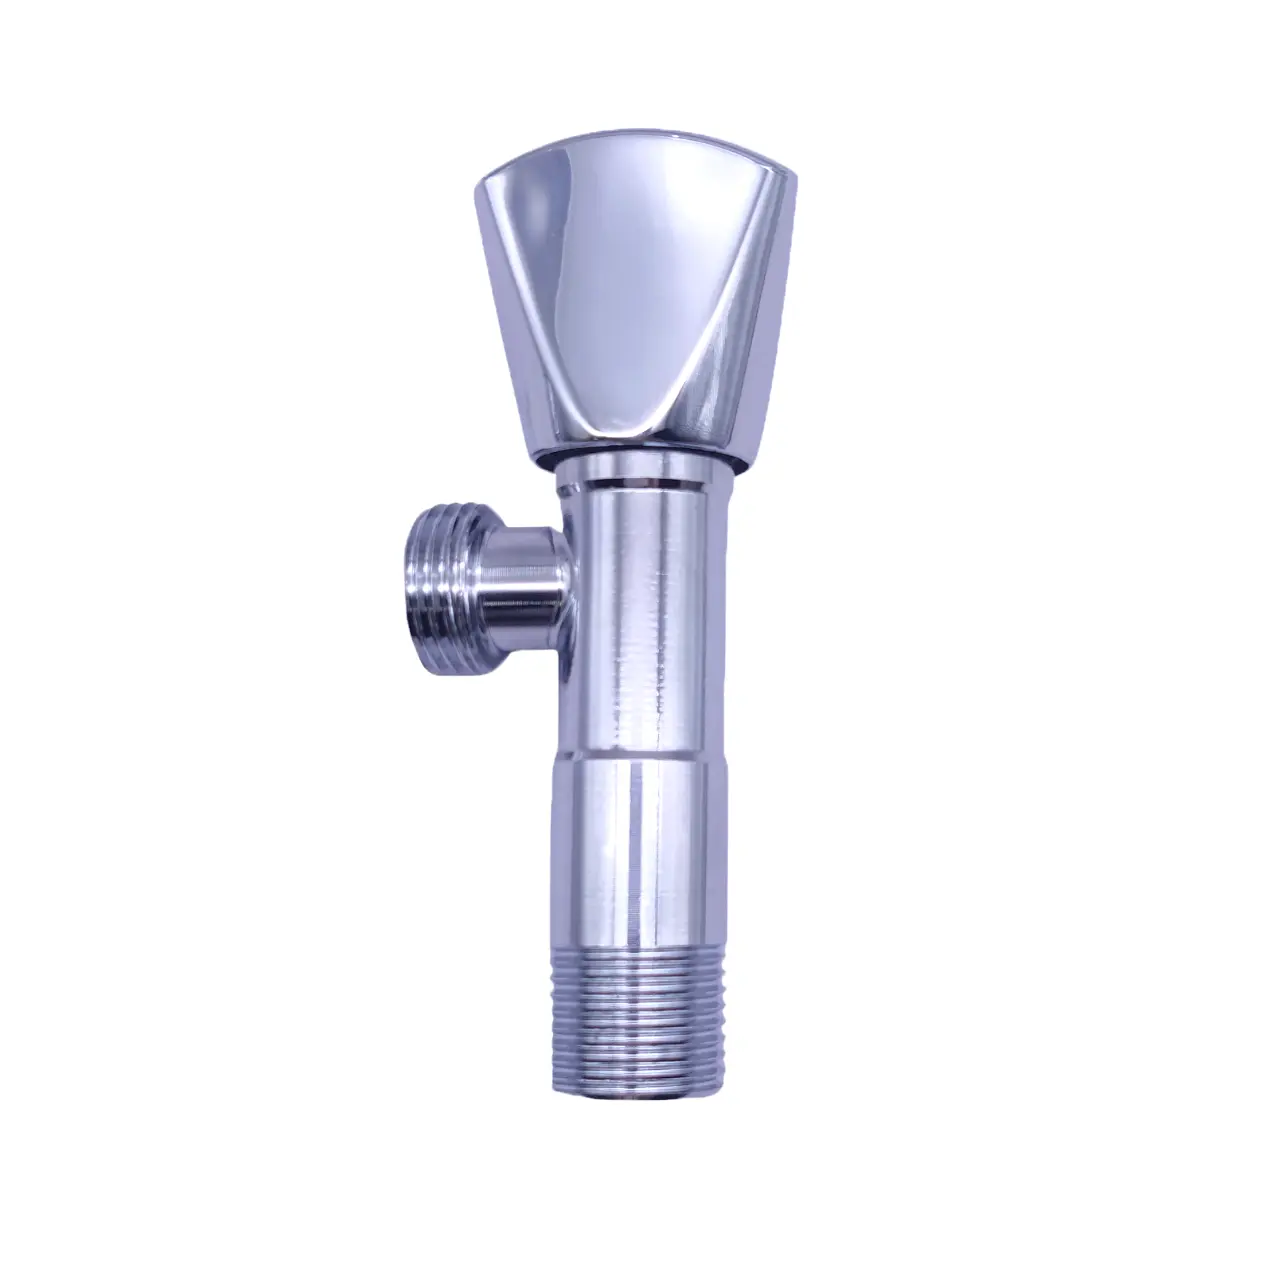 1/2 Inch 201 304 stainless steel angle valve chrome plated brass plastic handle angle valve